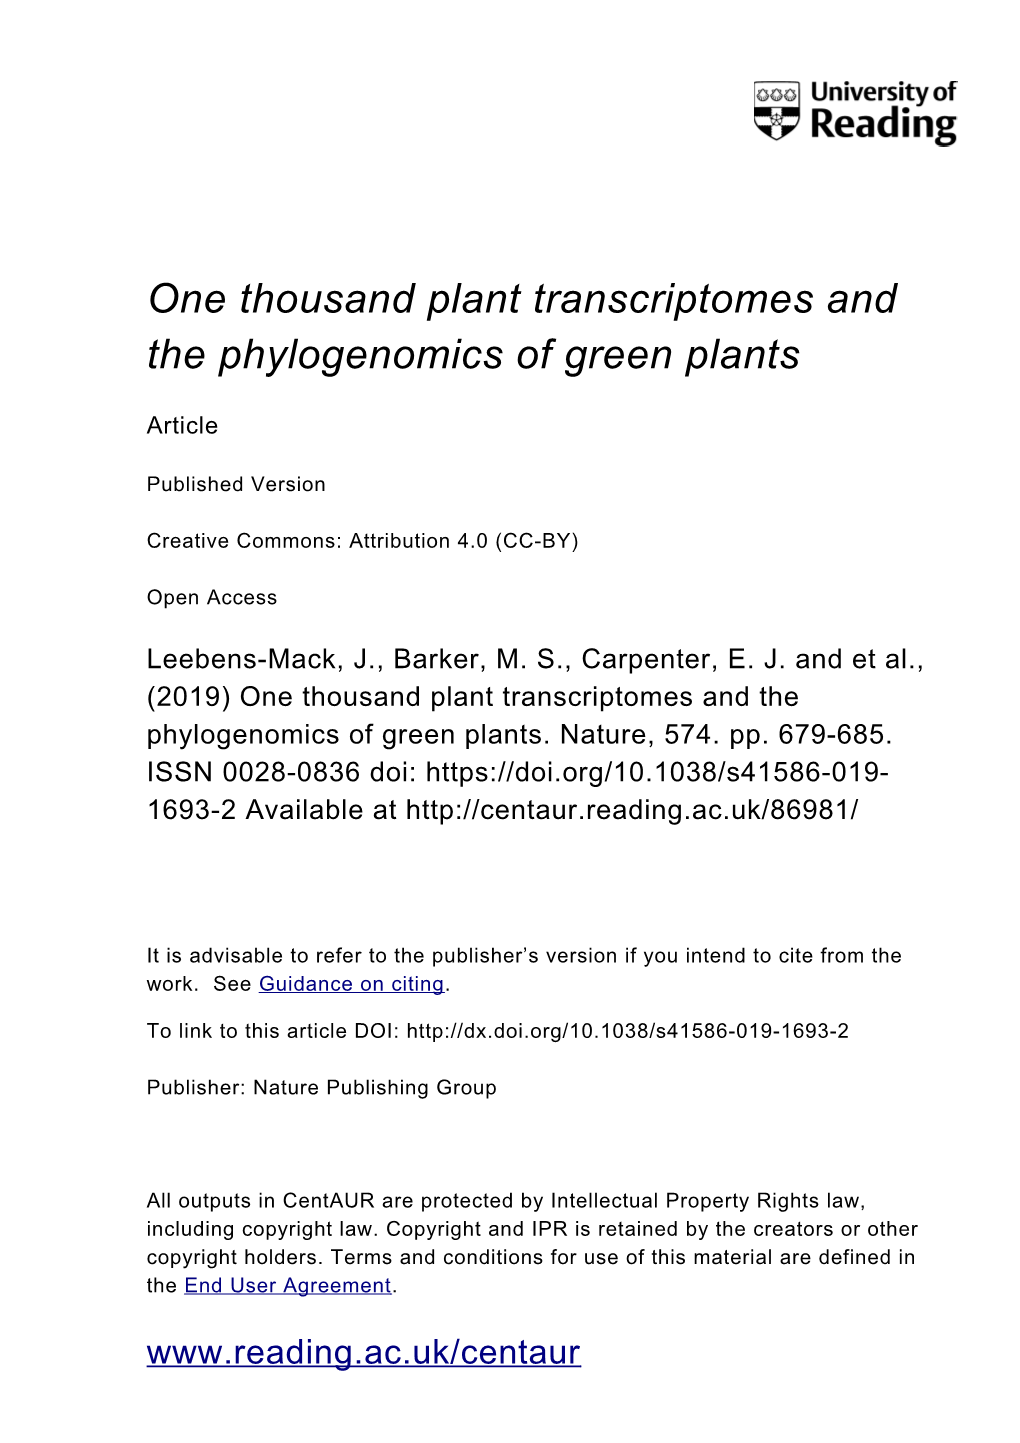 One Thousand Plant Transcriptomes and the Phylogenomics of Green Plants